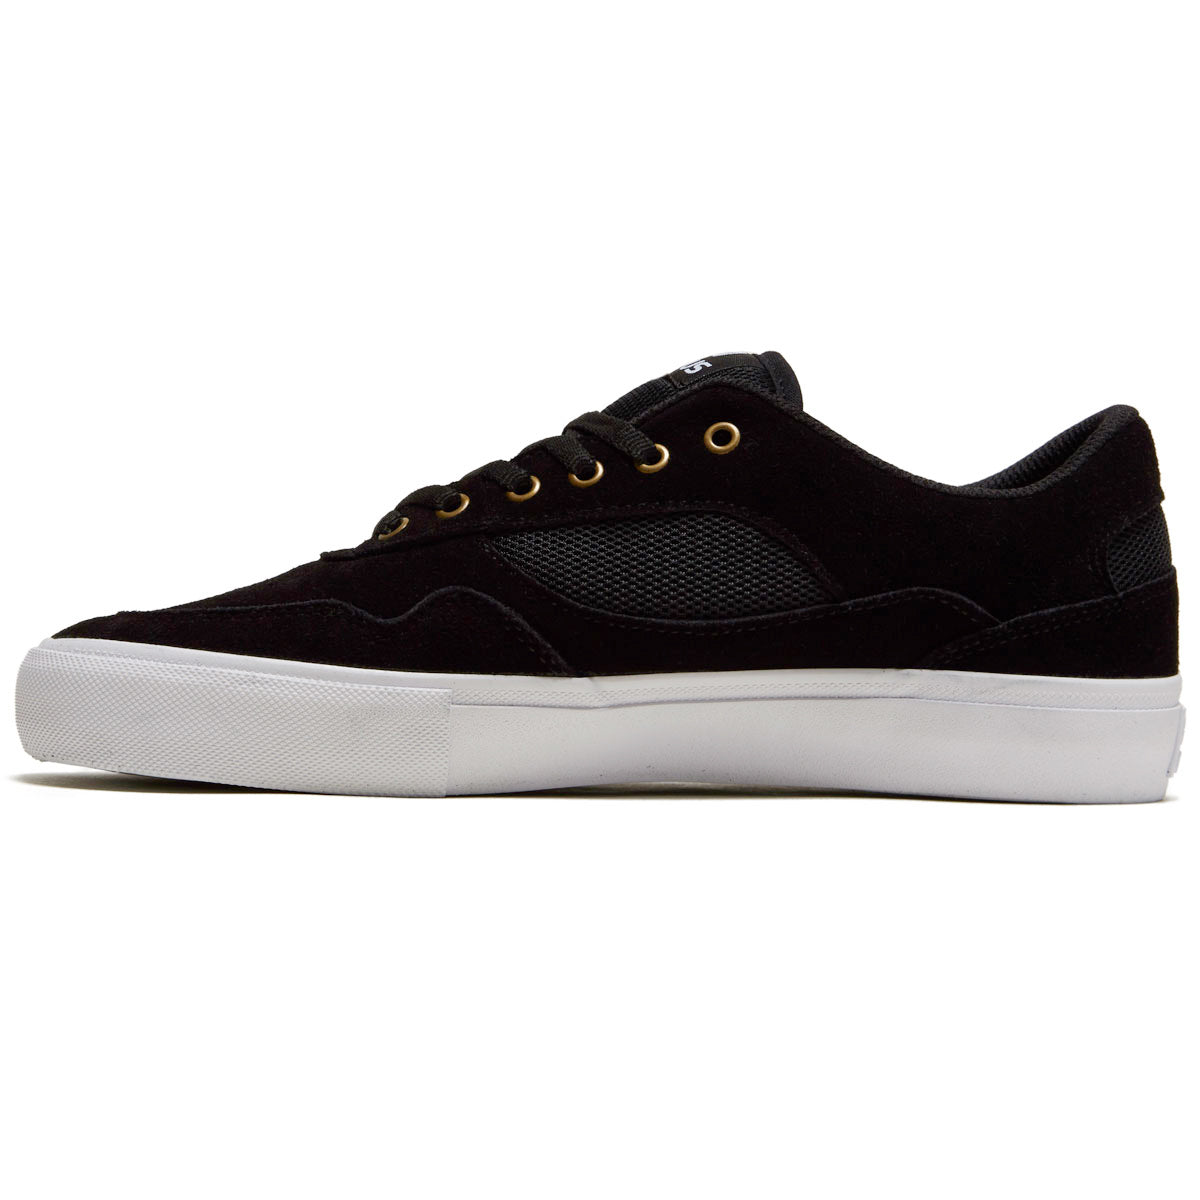 Opus Standard Low Shoes - Black/White image 2